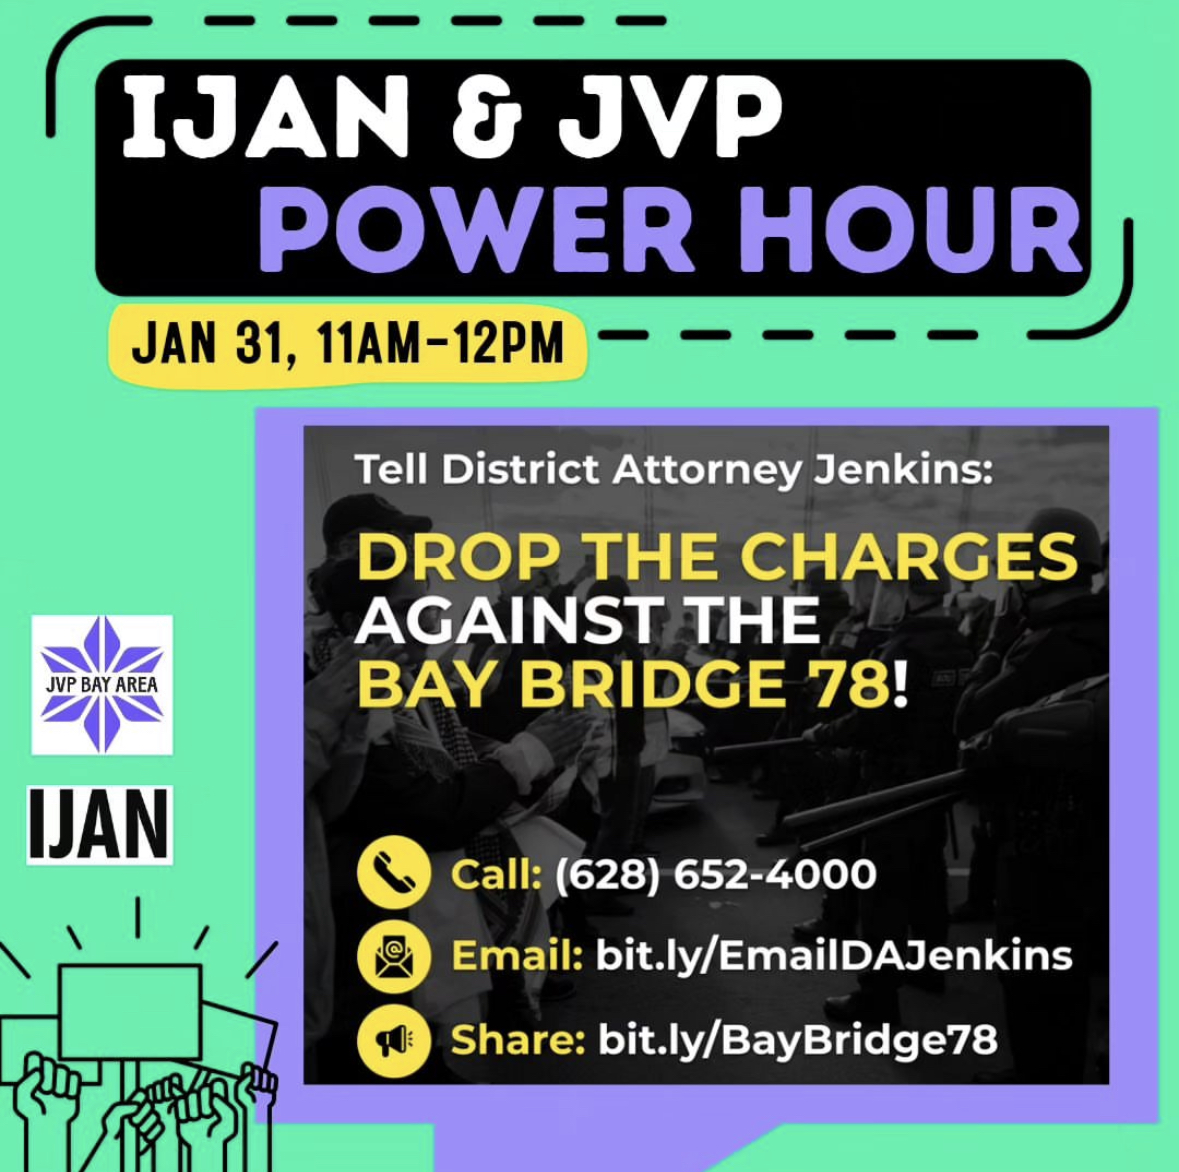 The #BayBridge78 are back in court this Thursday & Friday!

Join us tomorrow by calling or emailing the DA and join us in person Thursday & Friday to pack the court and demand that DA Jenkins drop the charges now!